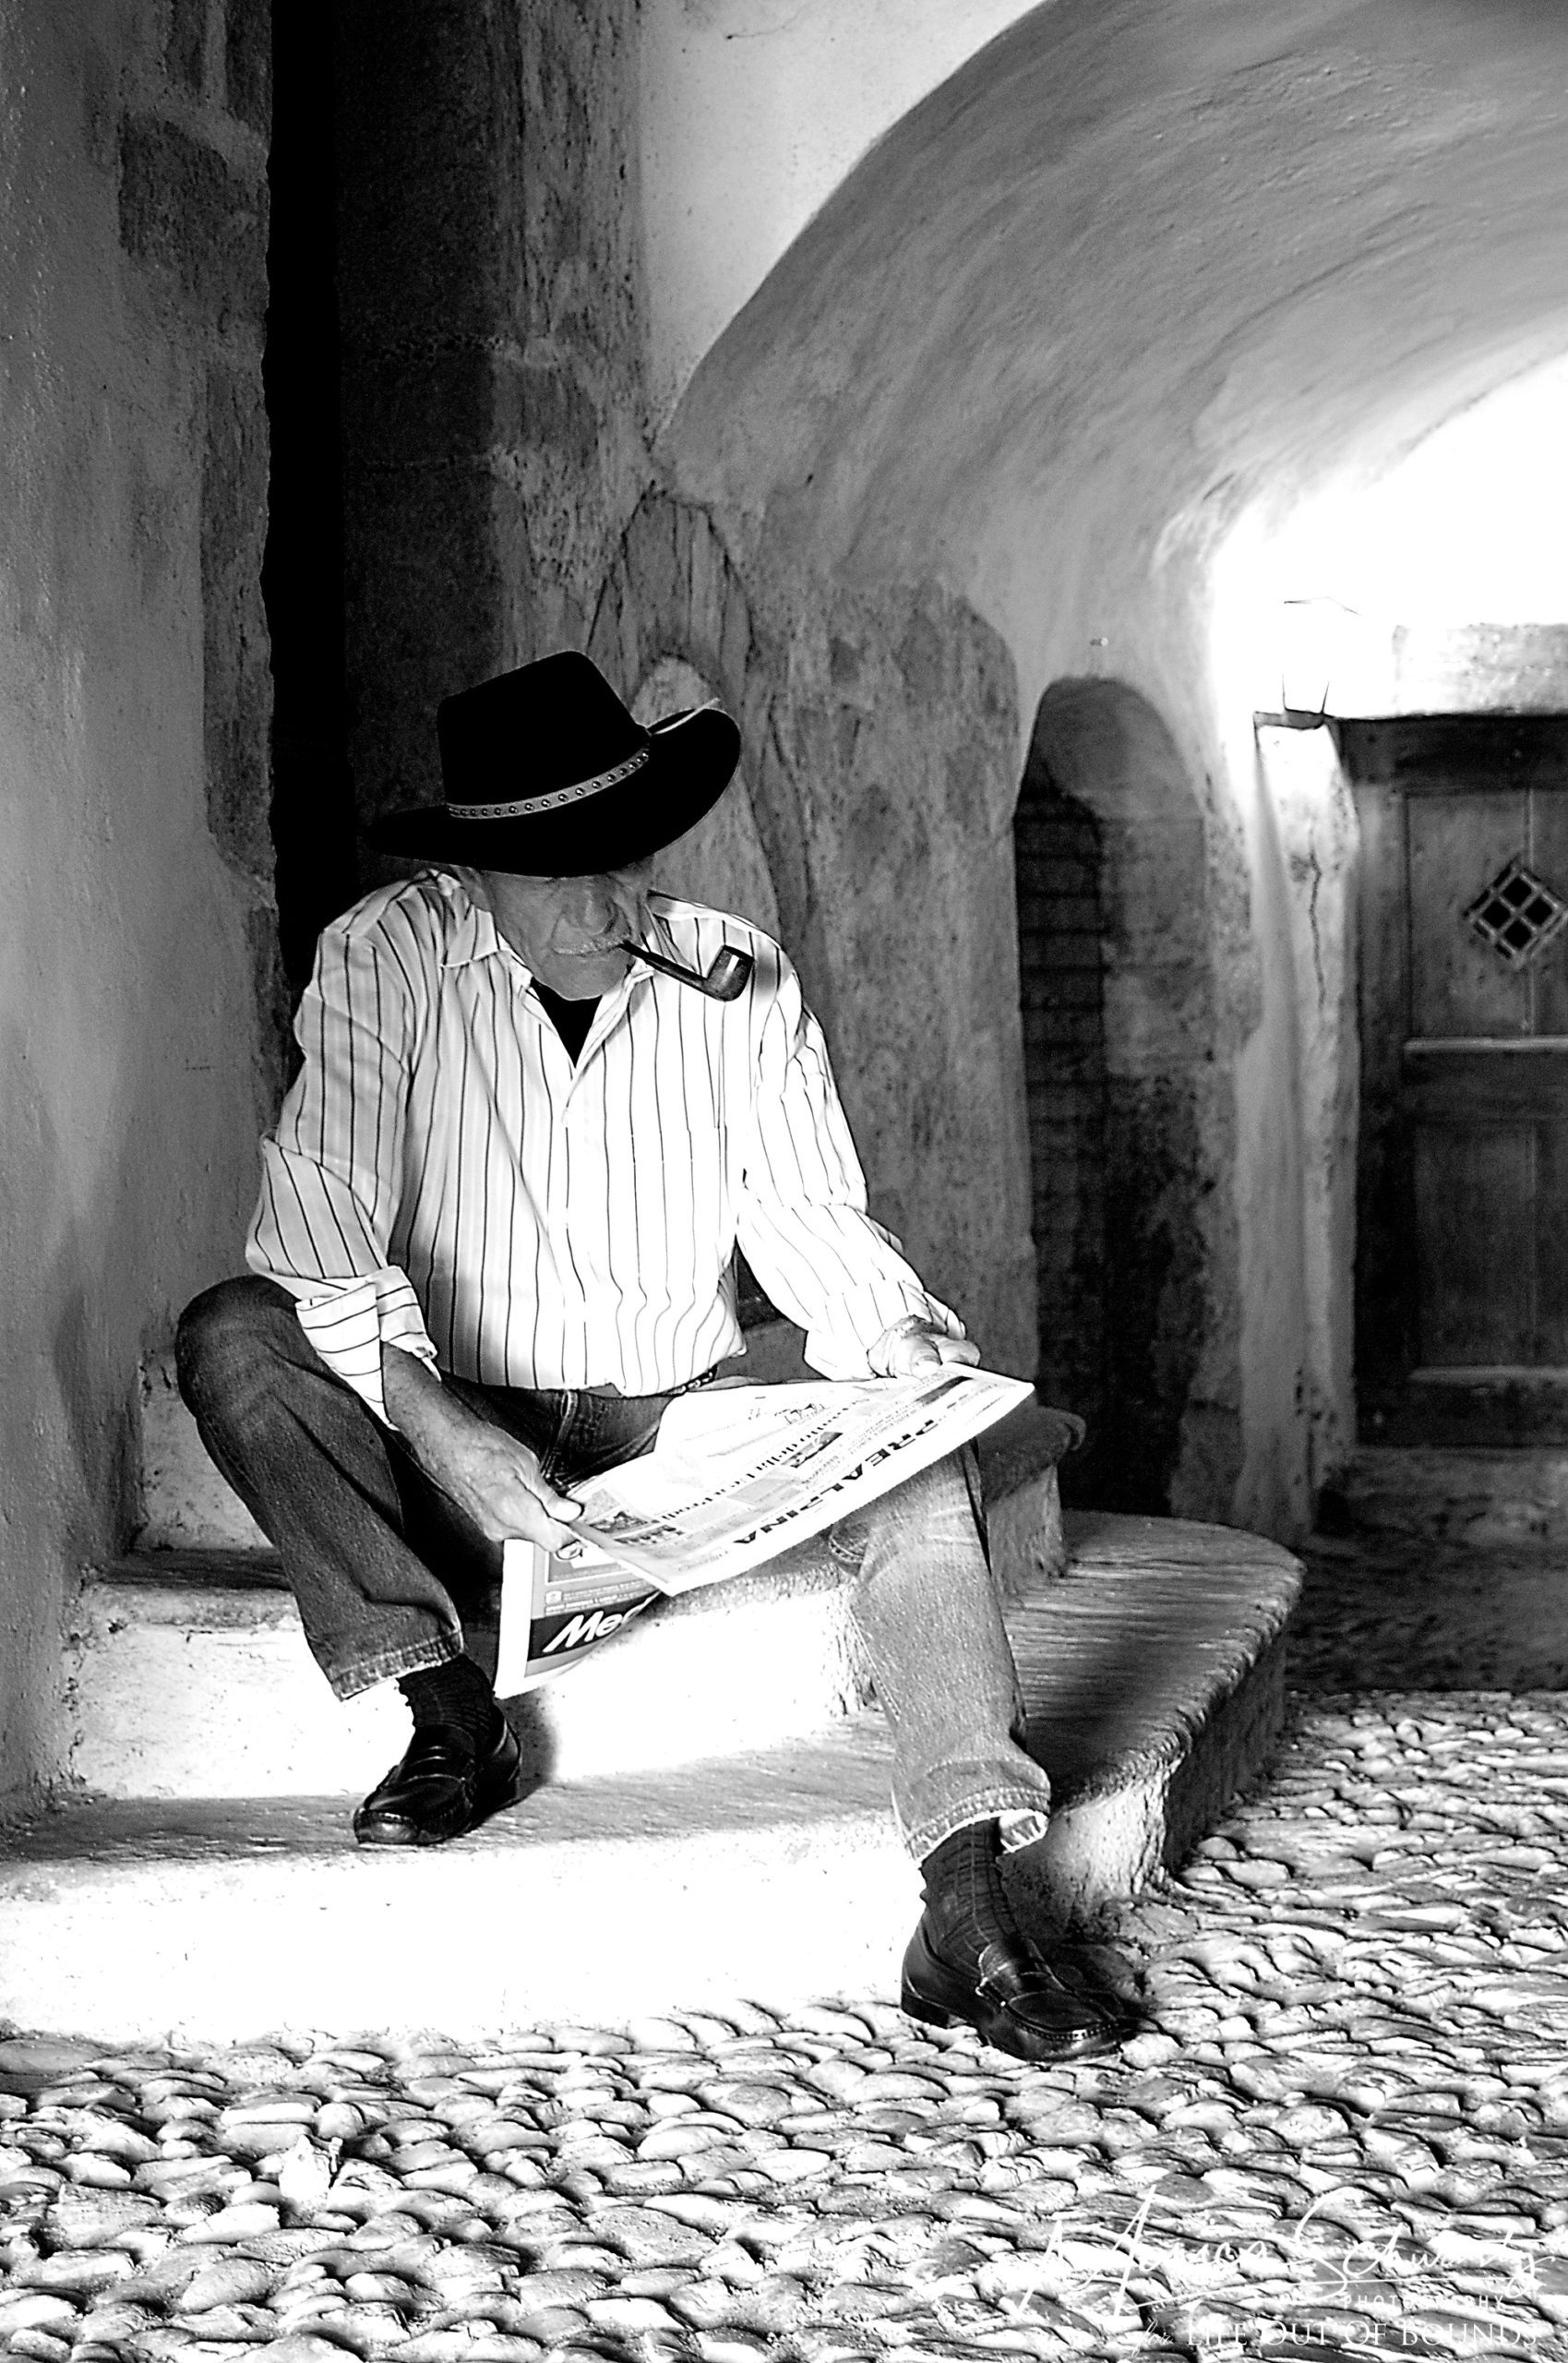 Portrait-of-Italian-man-smoking-a-pipe-and-reading-newspaper-in-medieval-village-setting